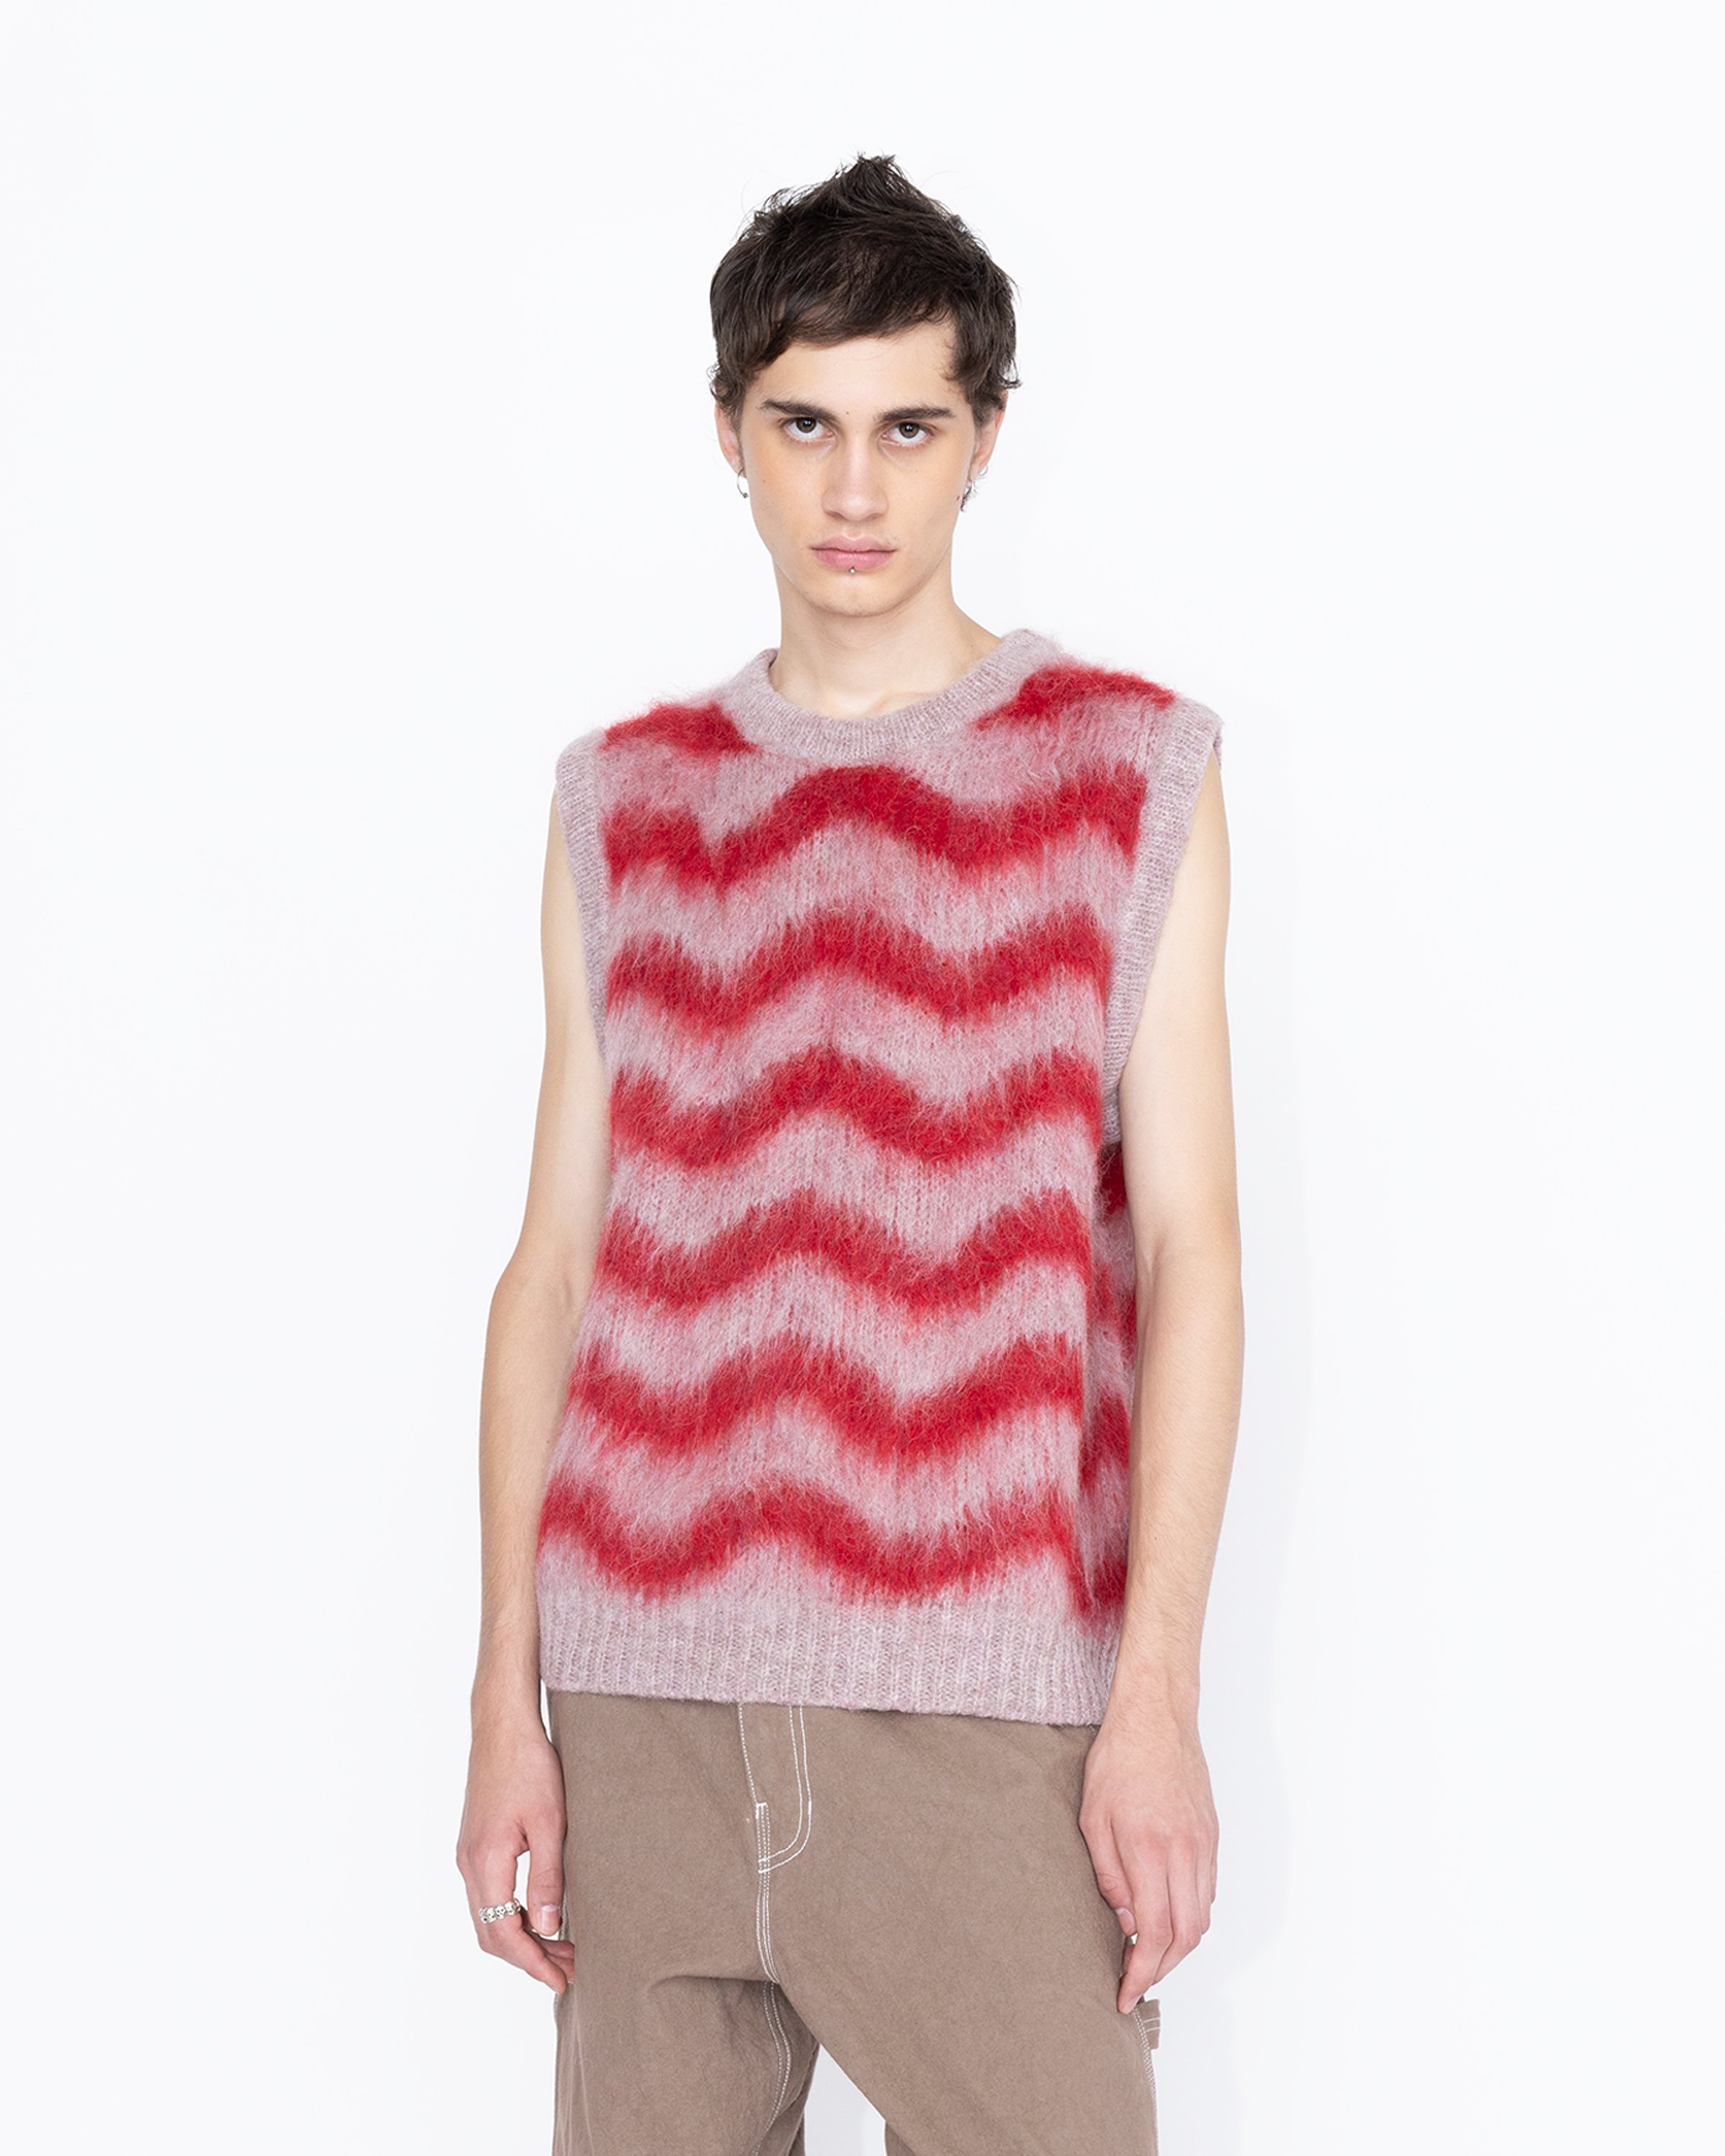 Highsnobiety HS05 - Alpaca Fuzzy Wave Sweater Vest Pale Rose/Red - Clothing - Multi - Image 3